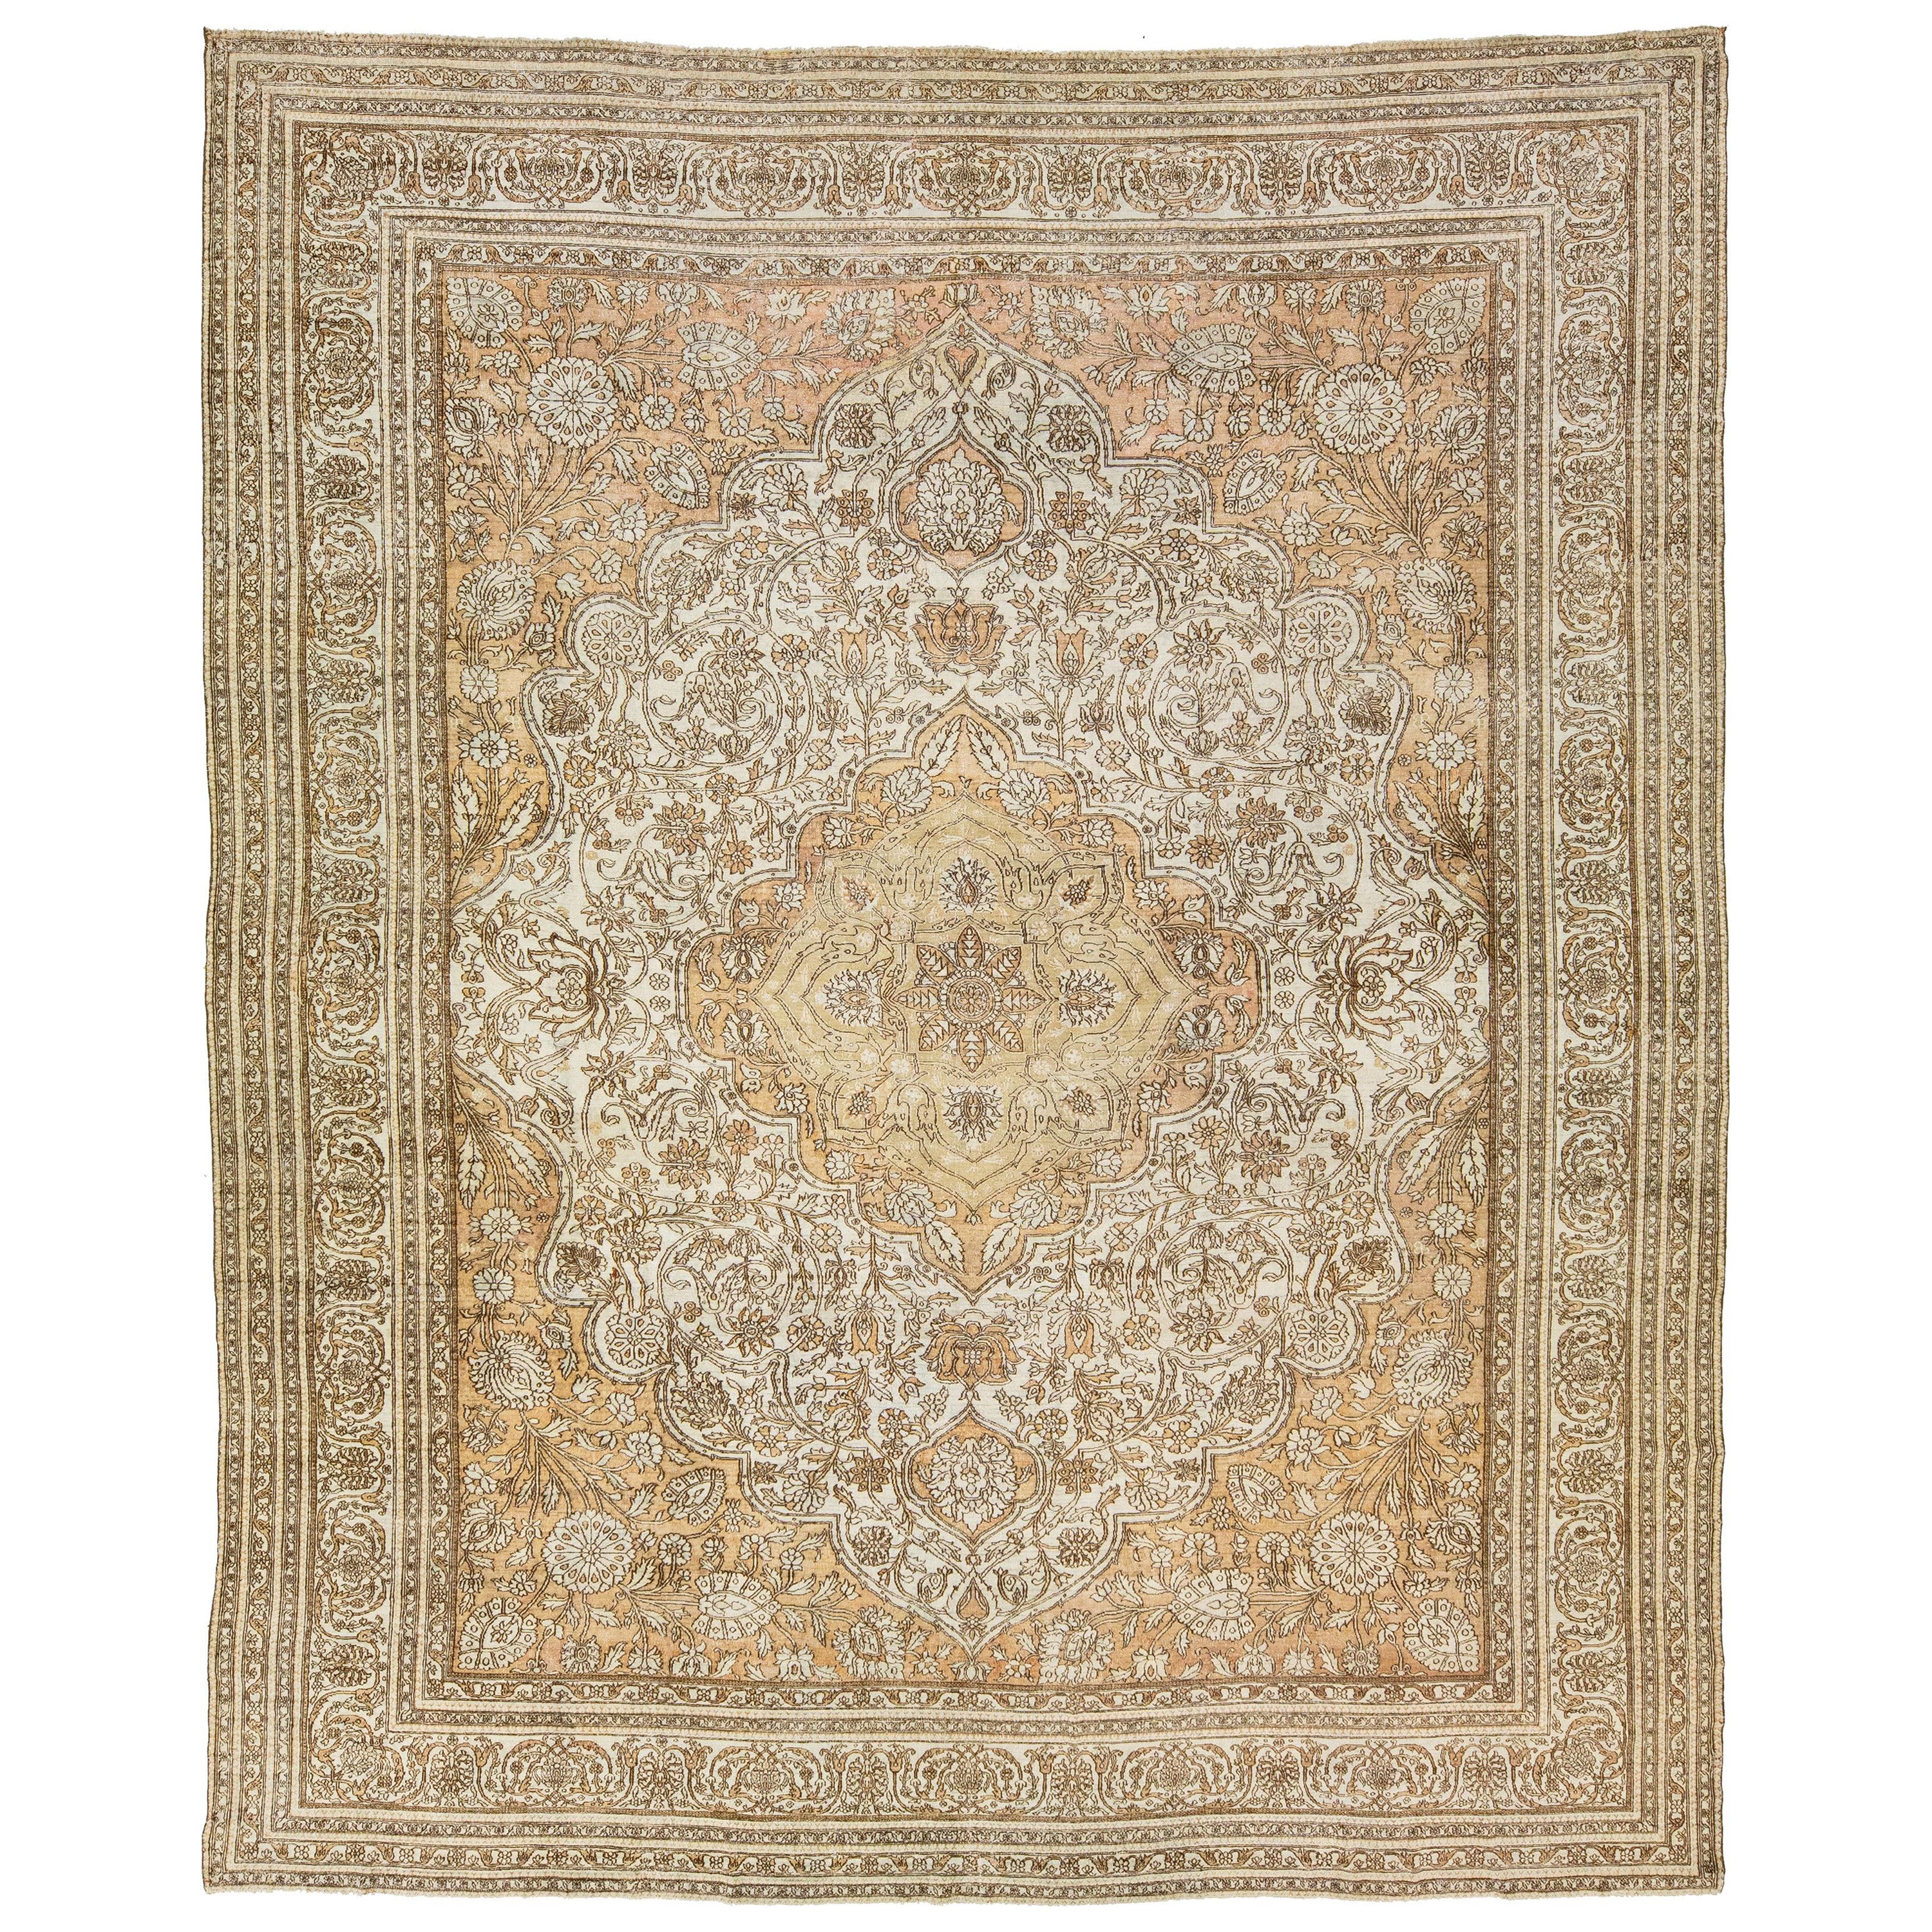 1900 Antique Indian Agra Wool Rug in Ivory and Tan with Medallion Design For Sale